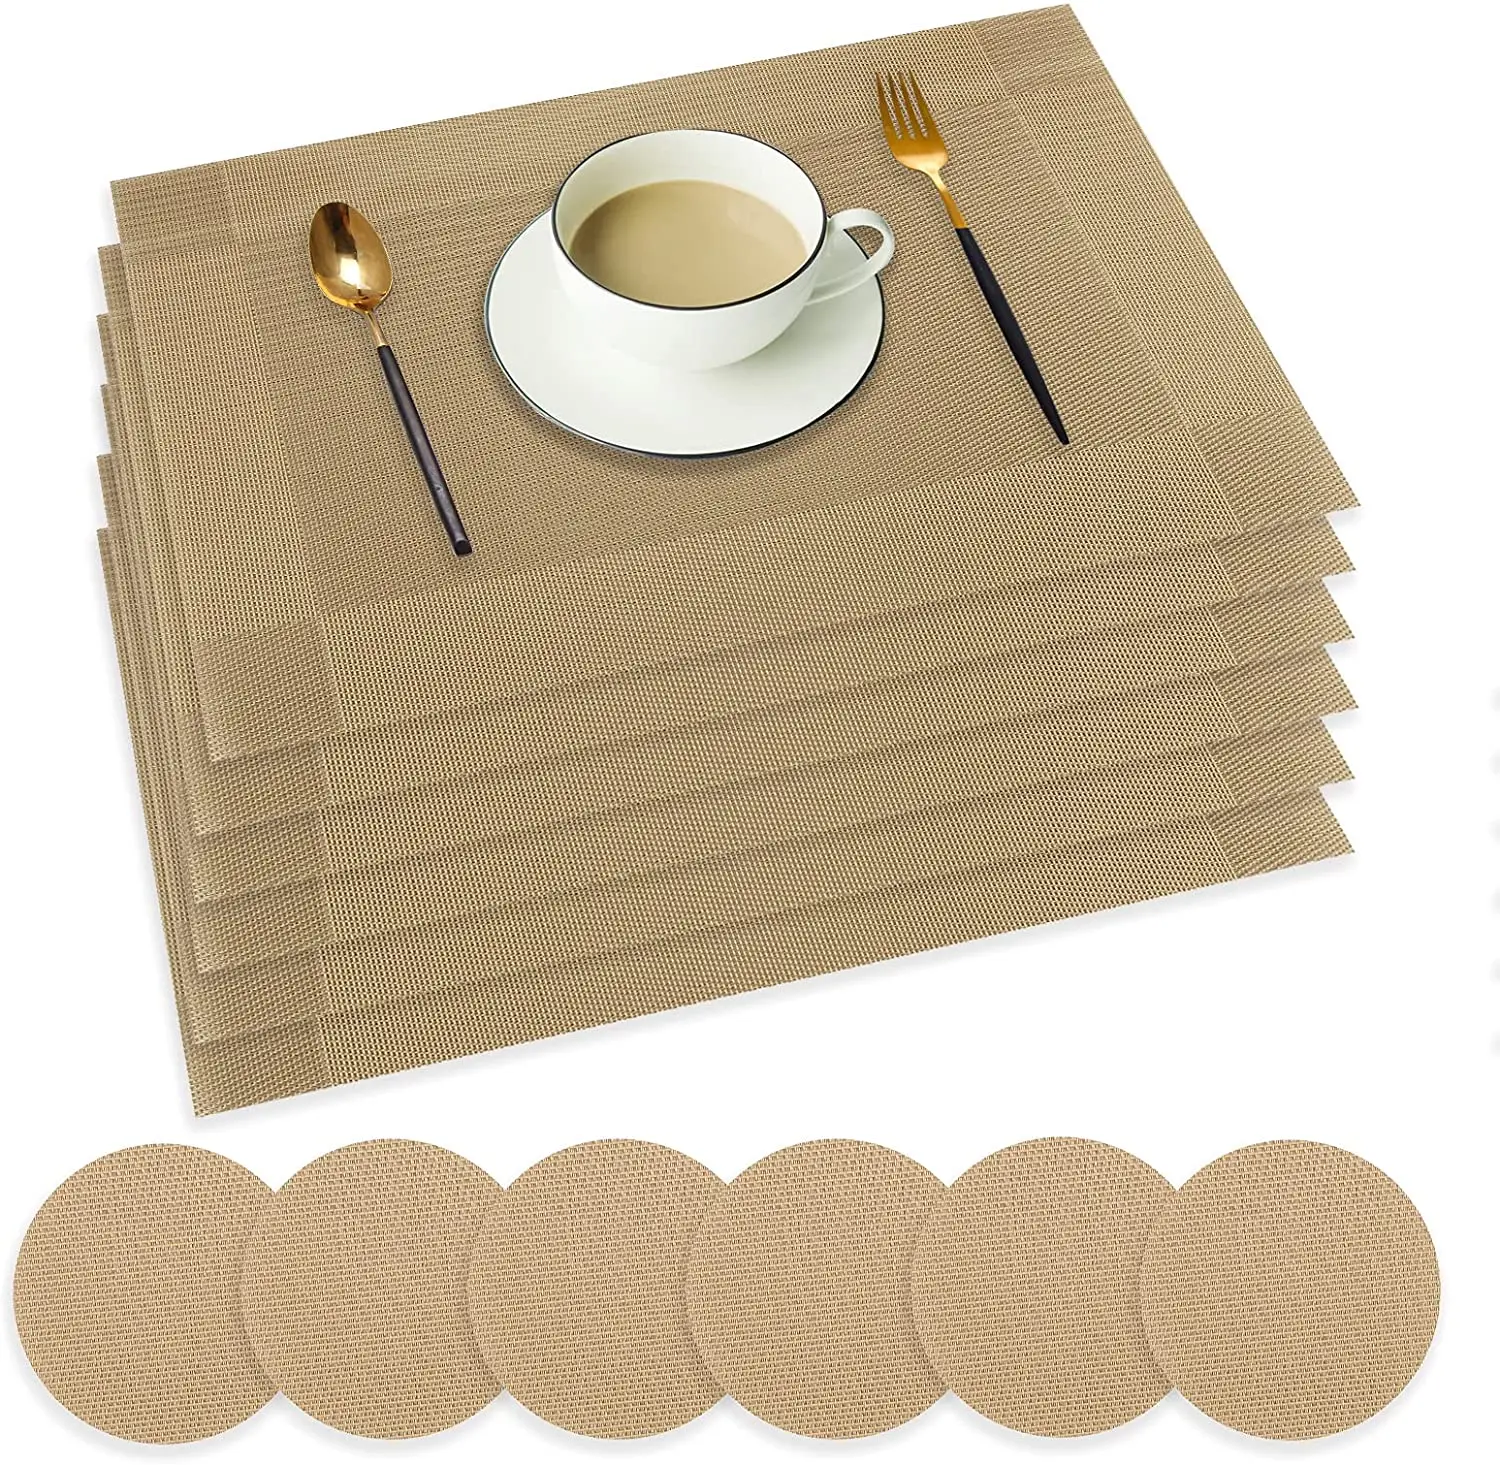 

Set of 6 Gold Placemat Washable PVC Dining Table Set Weave Mats Diagonal Frame Teslin Cloth Disc Bowl Coaster Non-slip Pad